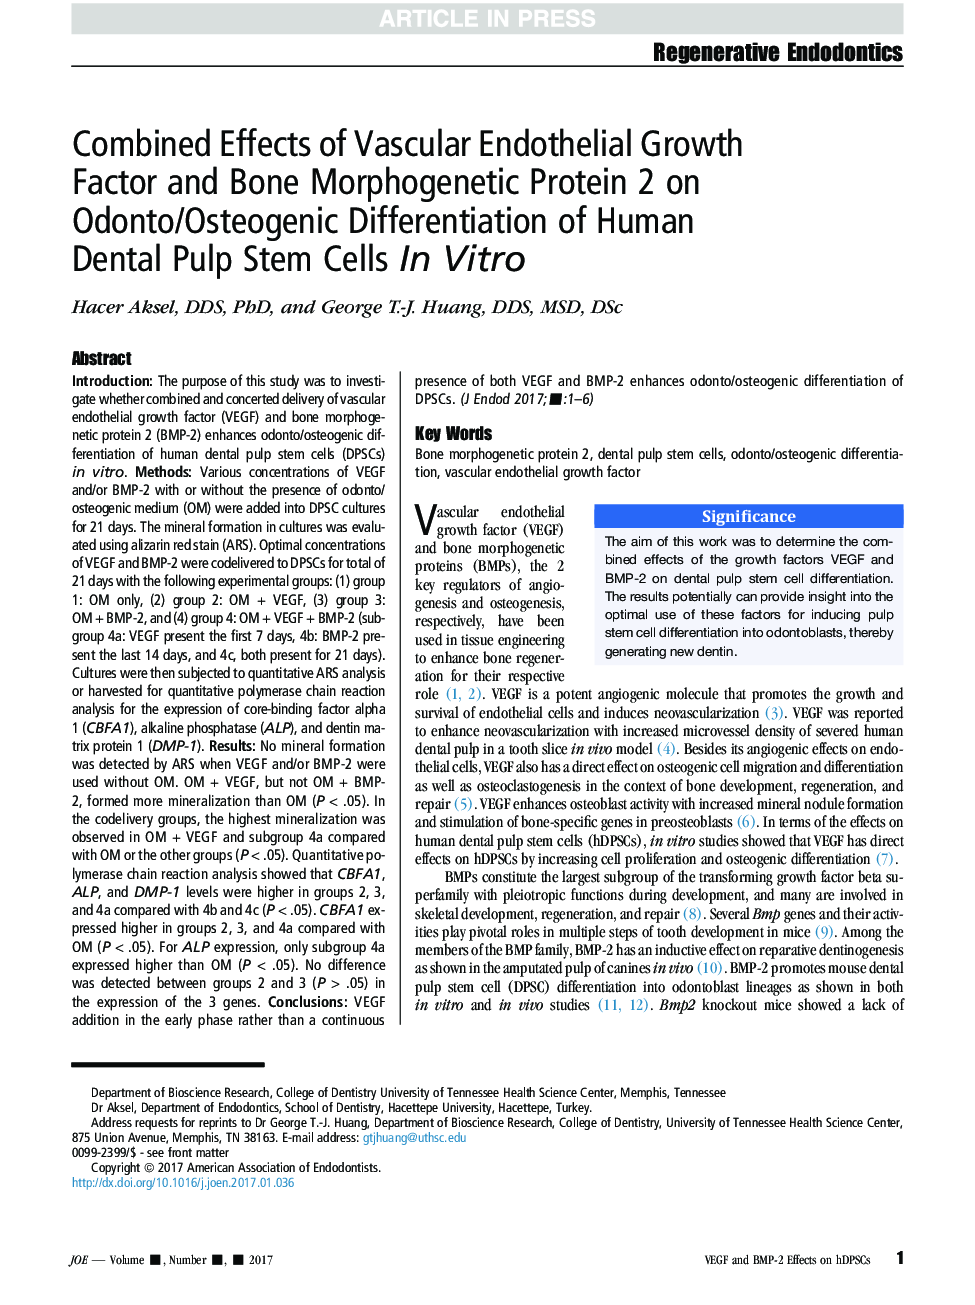 Combined Effects of Vascular Endothelial Growth Factor and Bone Morphogenetic Protein 2 on Odonto/Osteogenic Differentiation of Human Dental Pulp Stem Cells InÂ Vitro